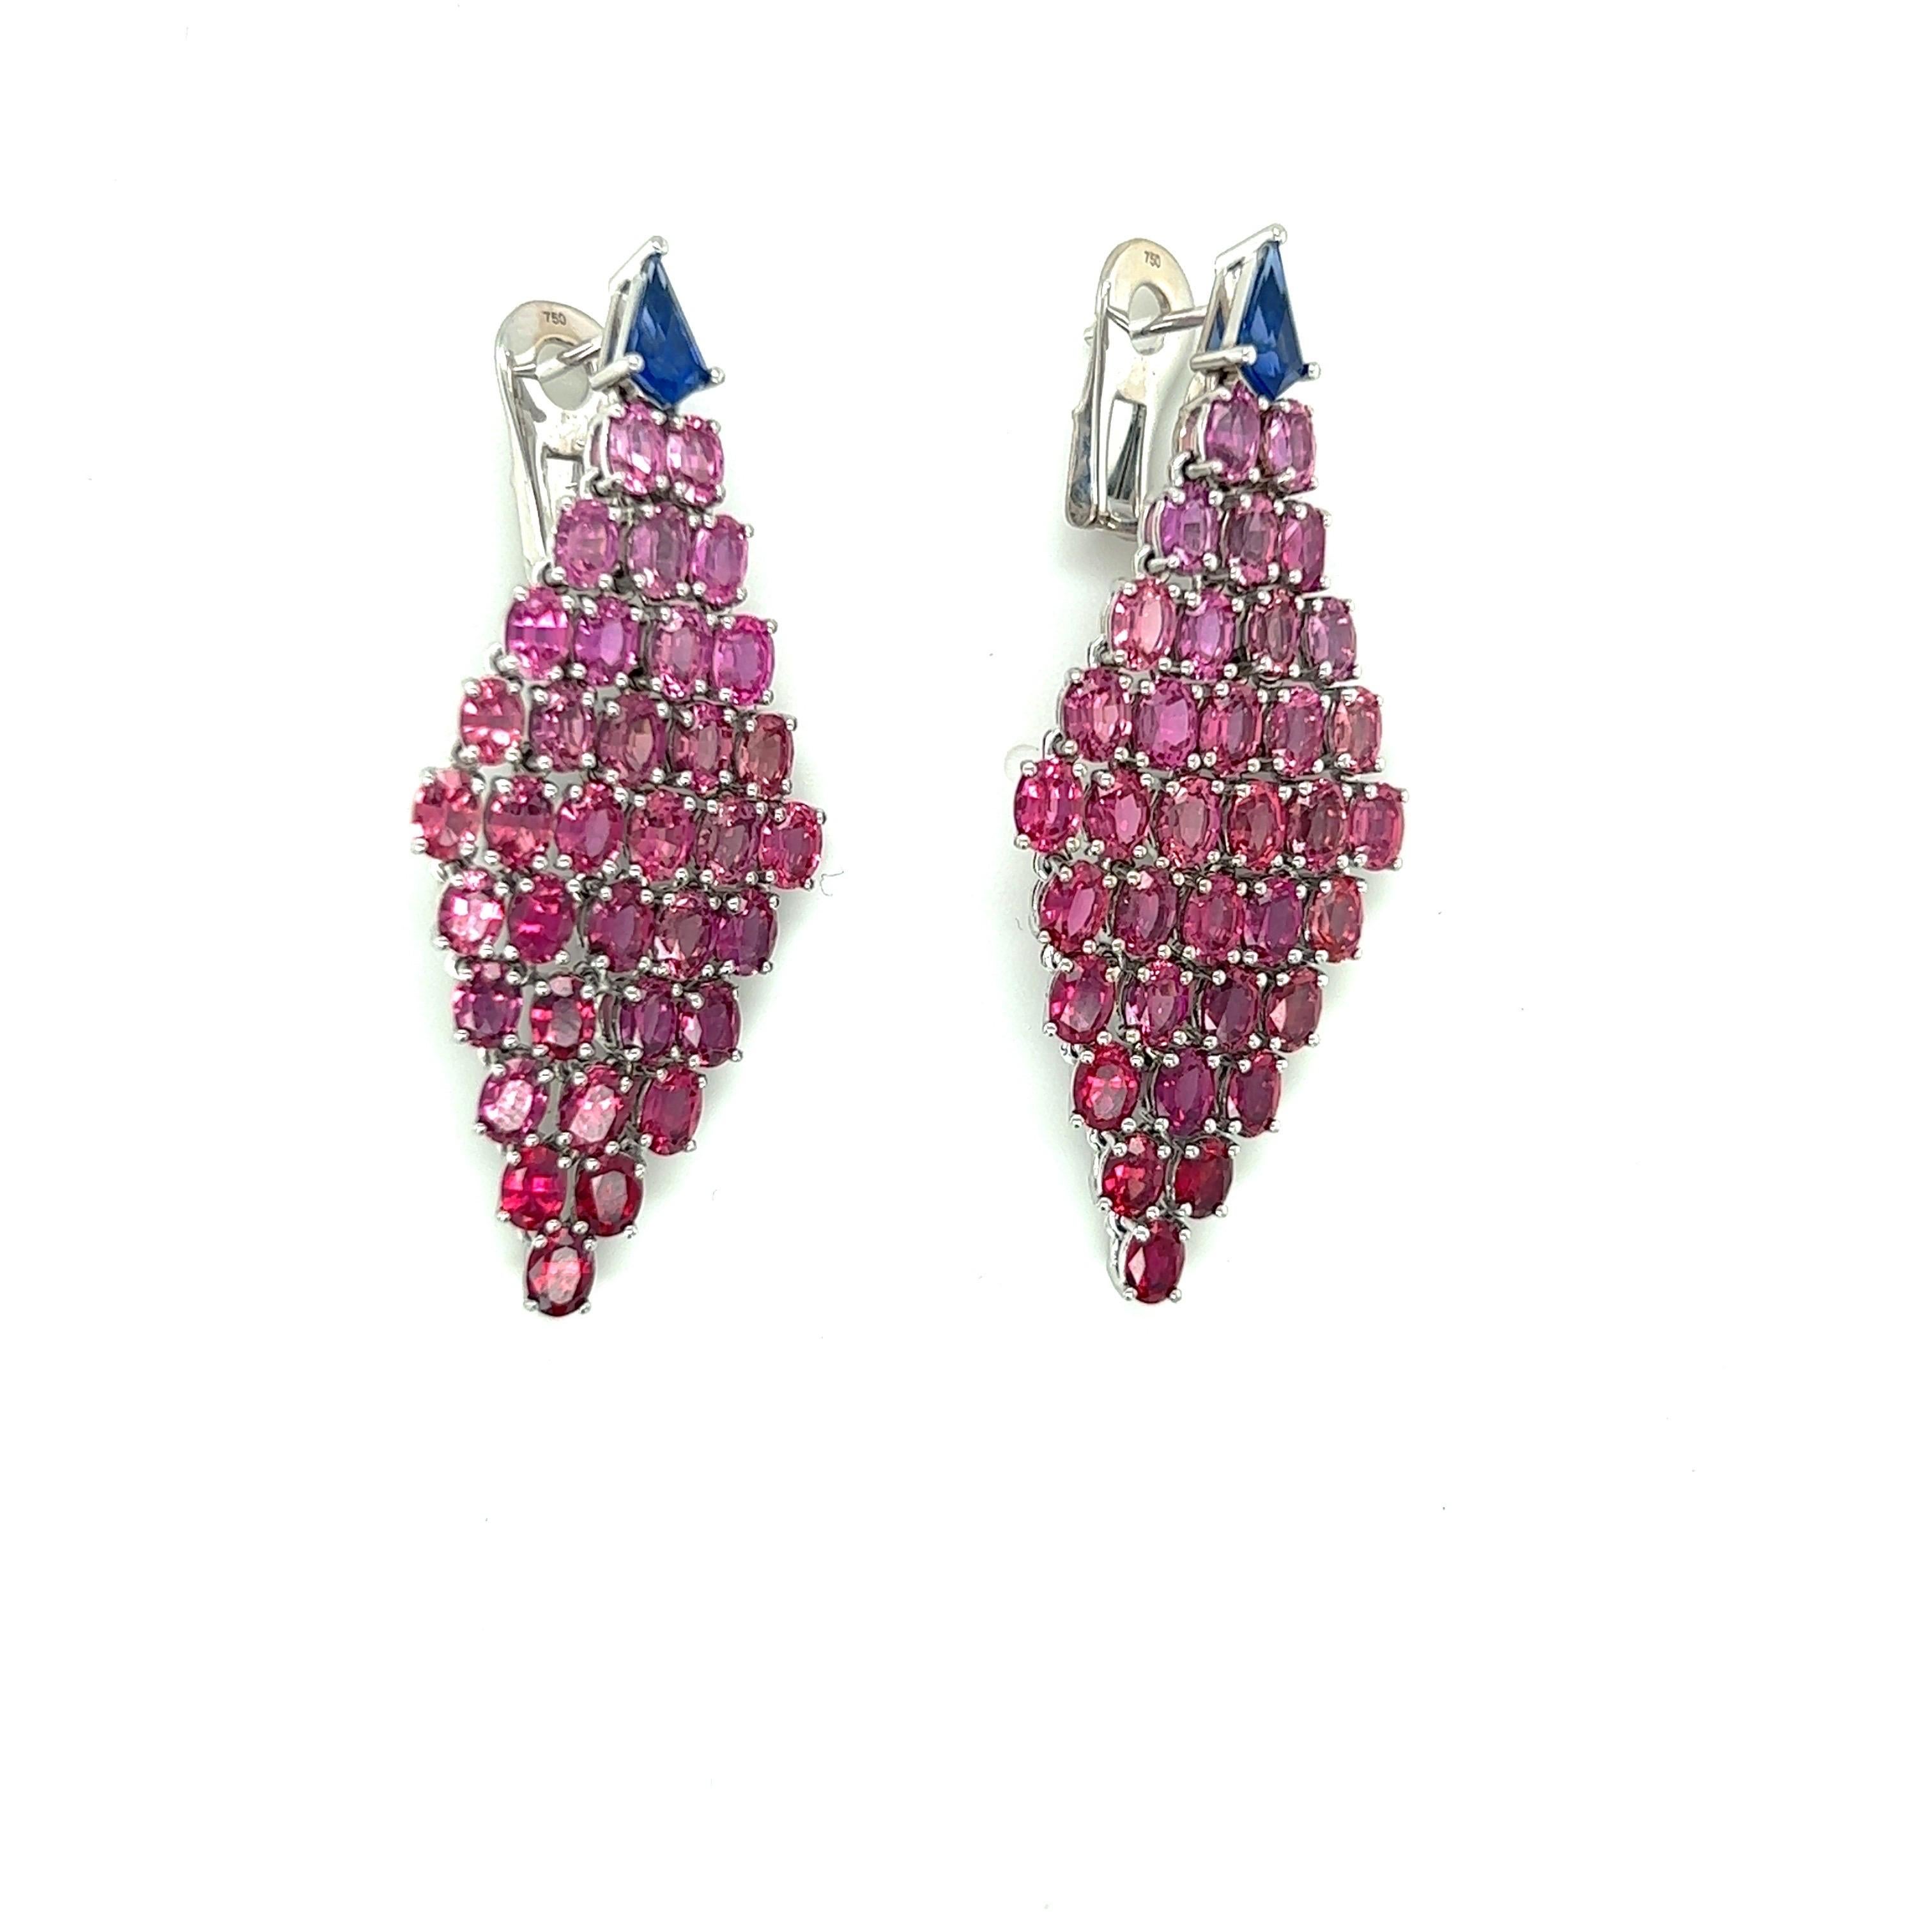 These magnificent earrings are a true show stopper.
The 18 karat white gold earrings are set with 14.20 carats of varying shades, from pink to red, of ombre' rubies.The tops are set with 0.98 carats of blue sapphires.
The earrings are pierced and